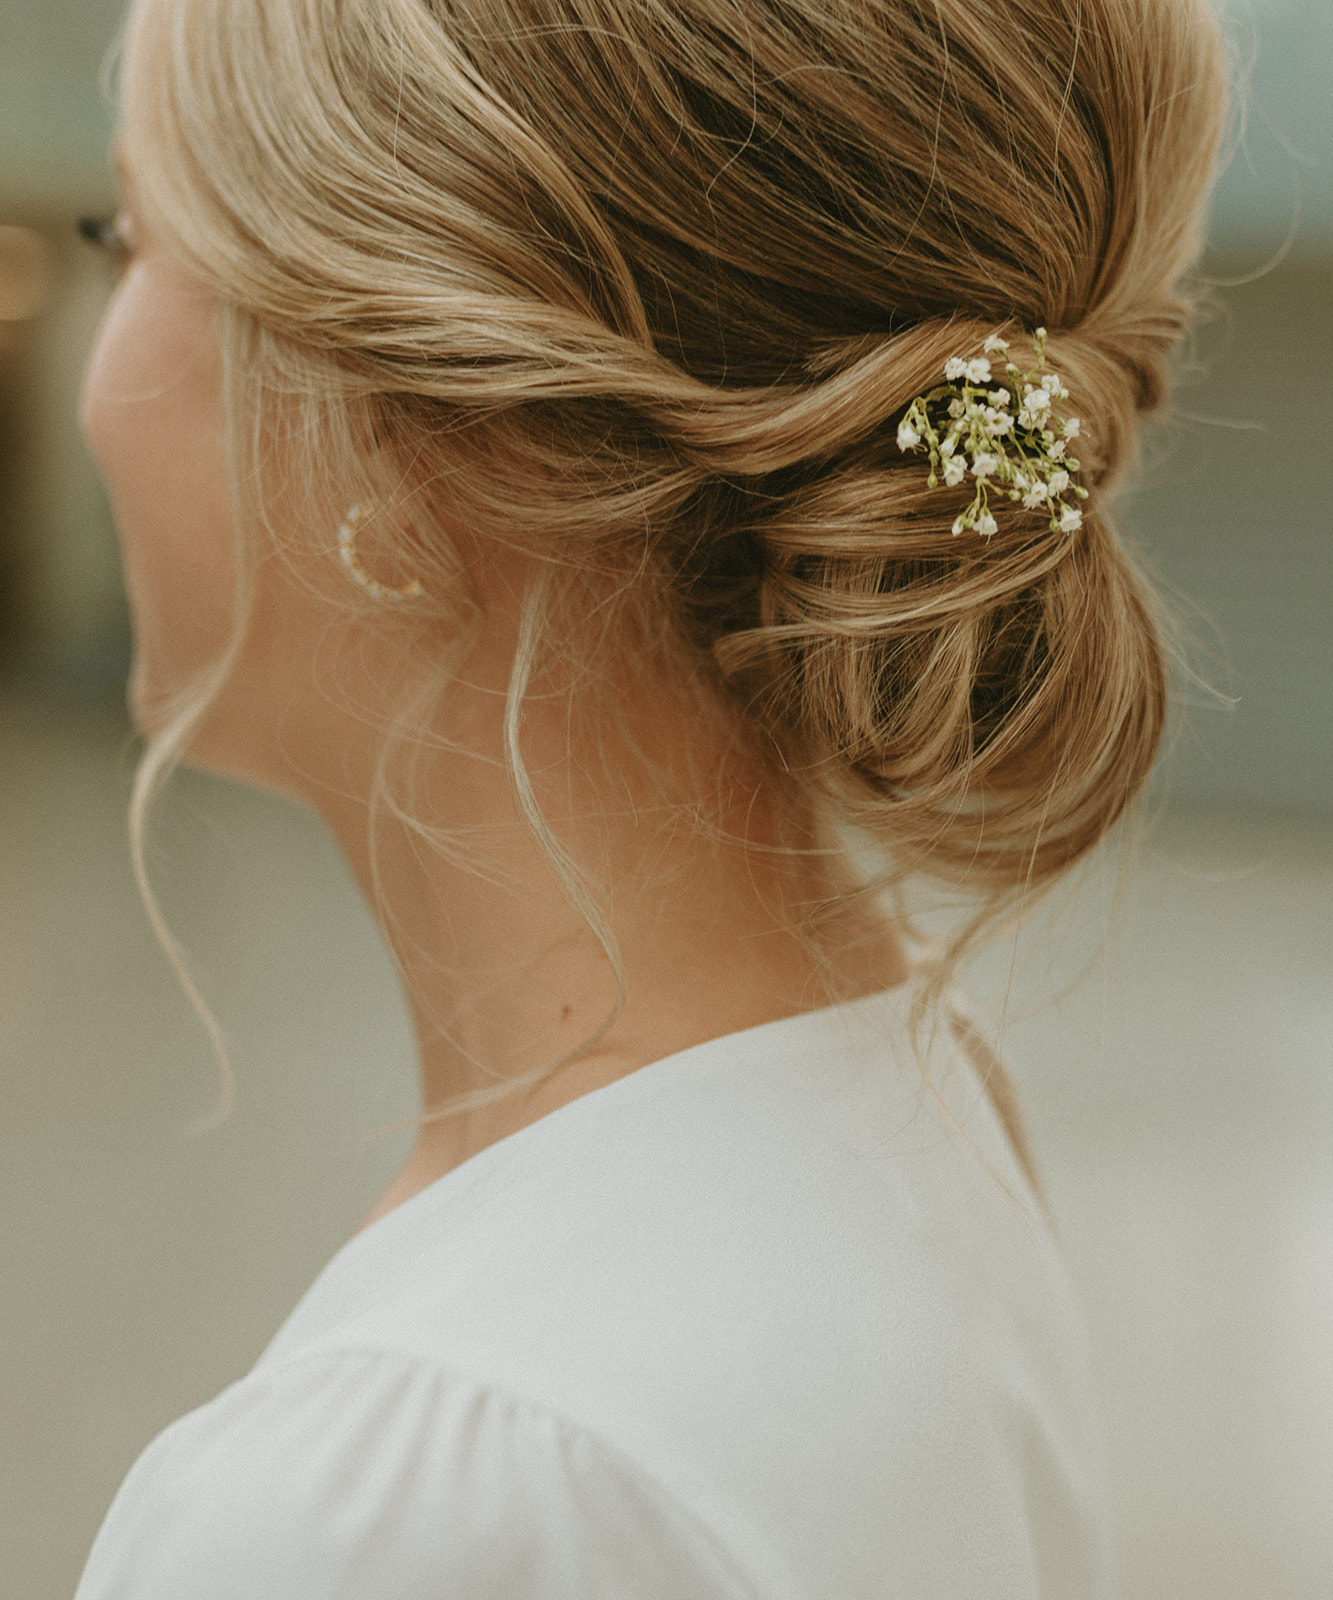 This Minimalist Micro-Wedding features a DIY Bouquet Made by the Bride Herself - updo, wedding hair, bridal style